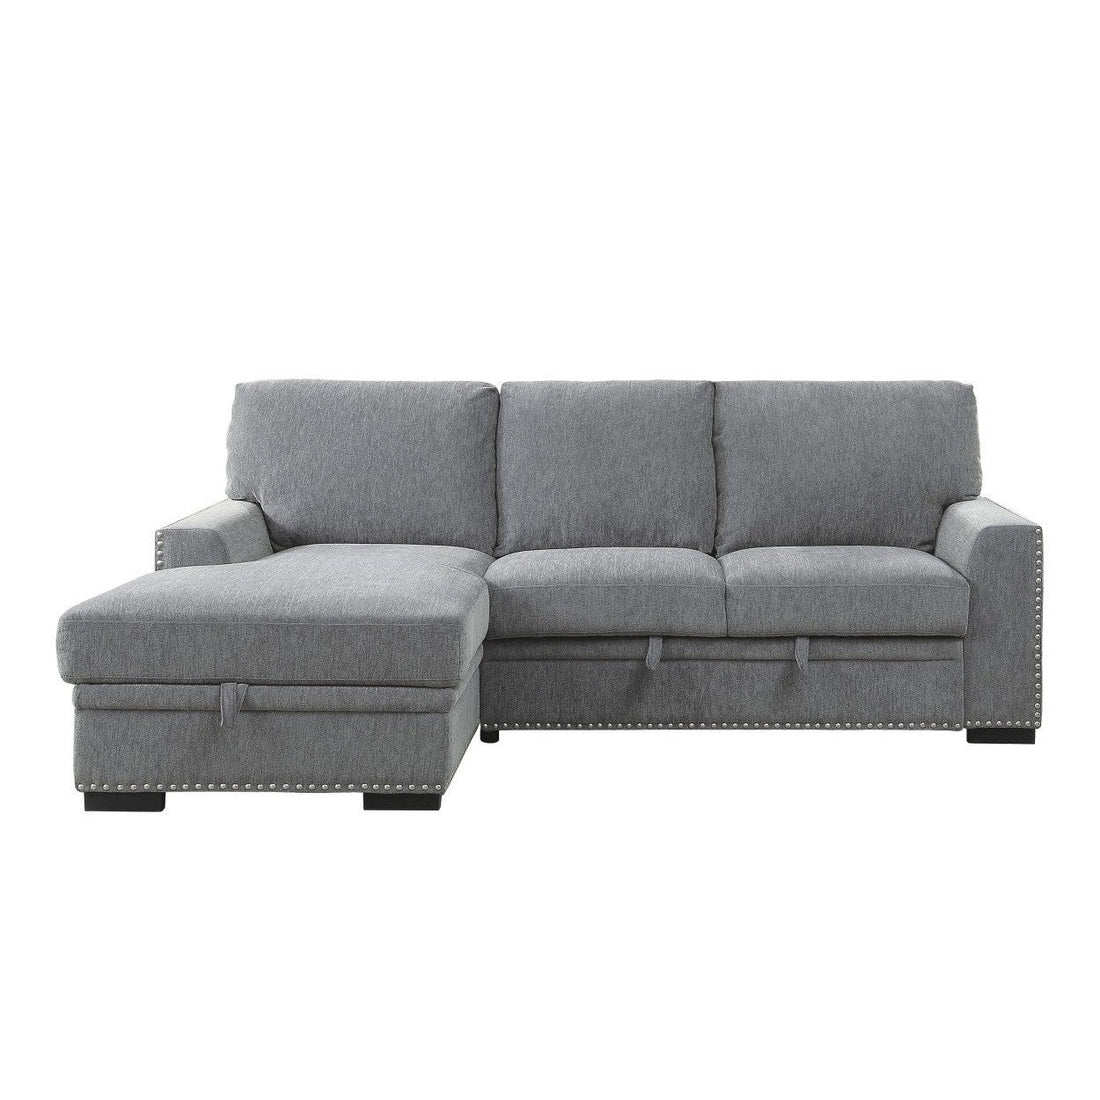 (2)2-Piece Sectional with Pull-out Bed and Hidden Storage 9468DG*2LC2R